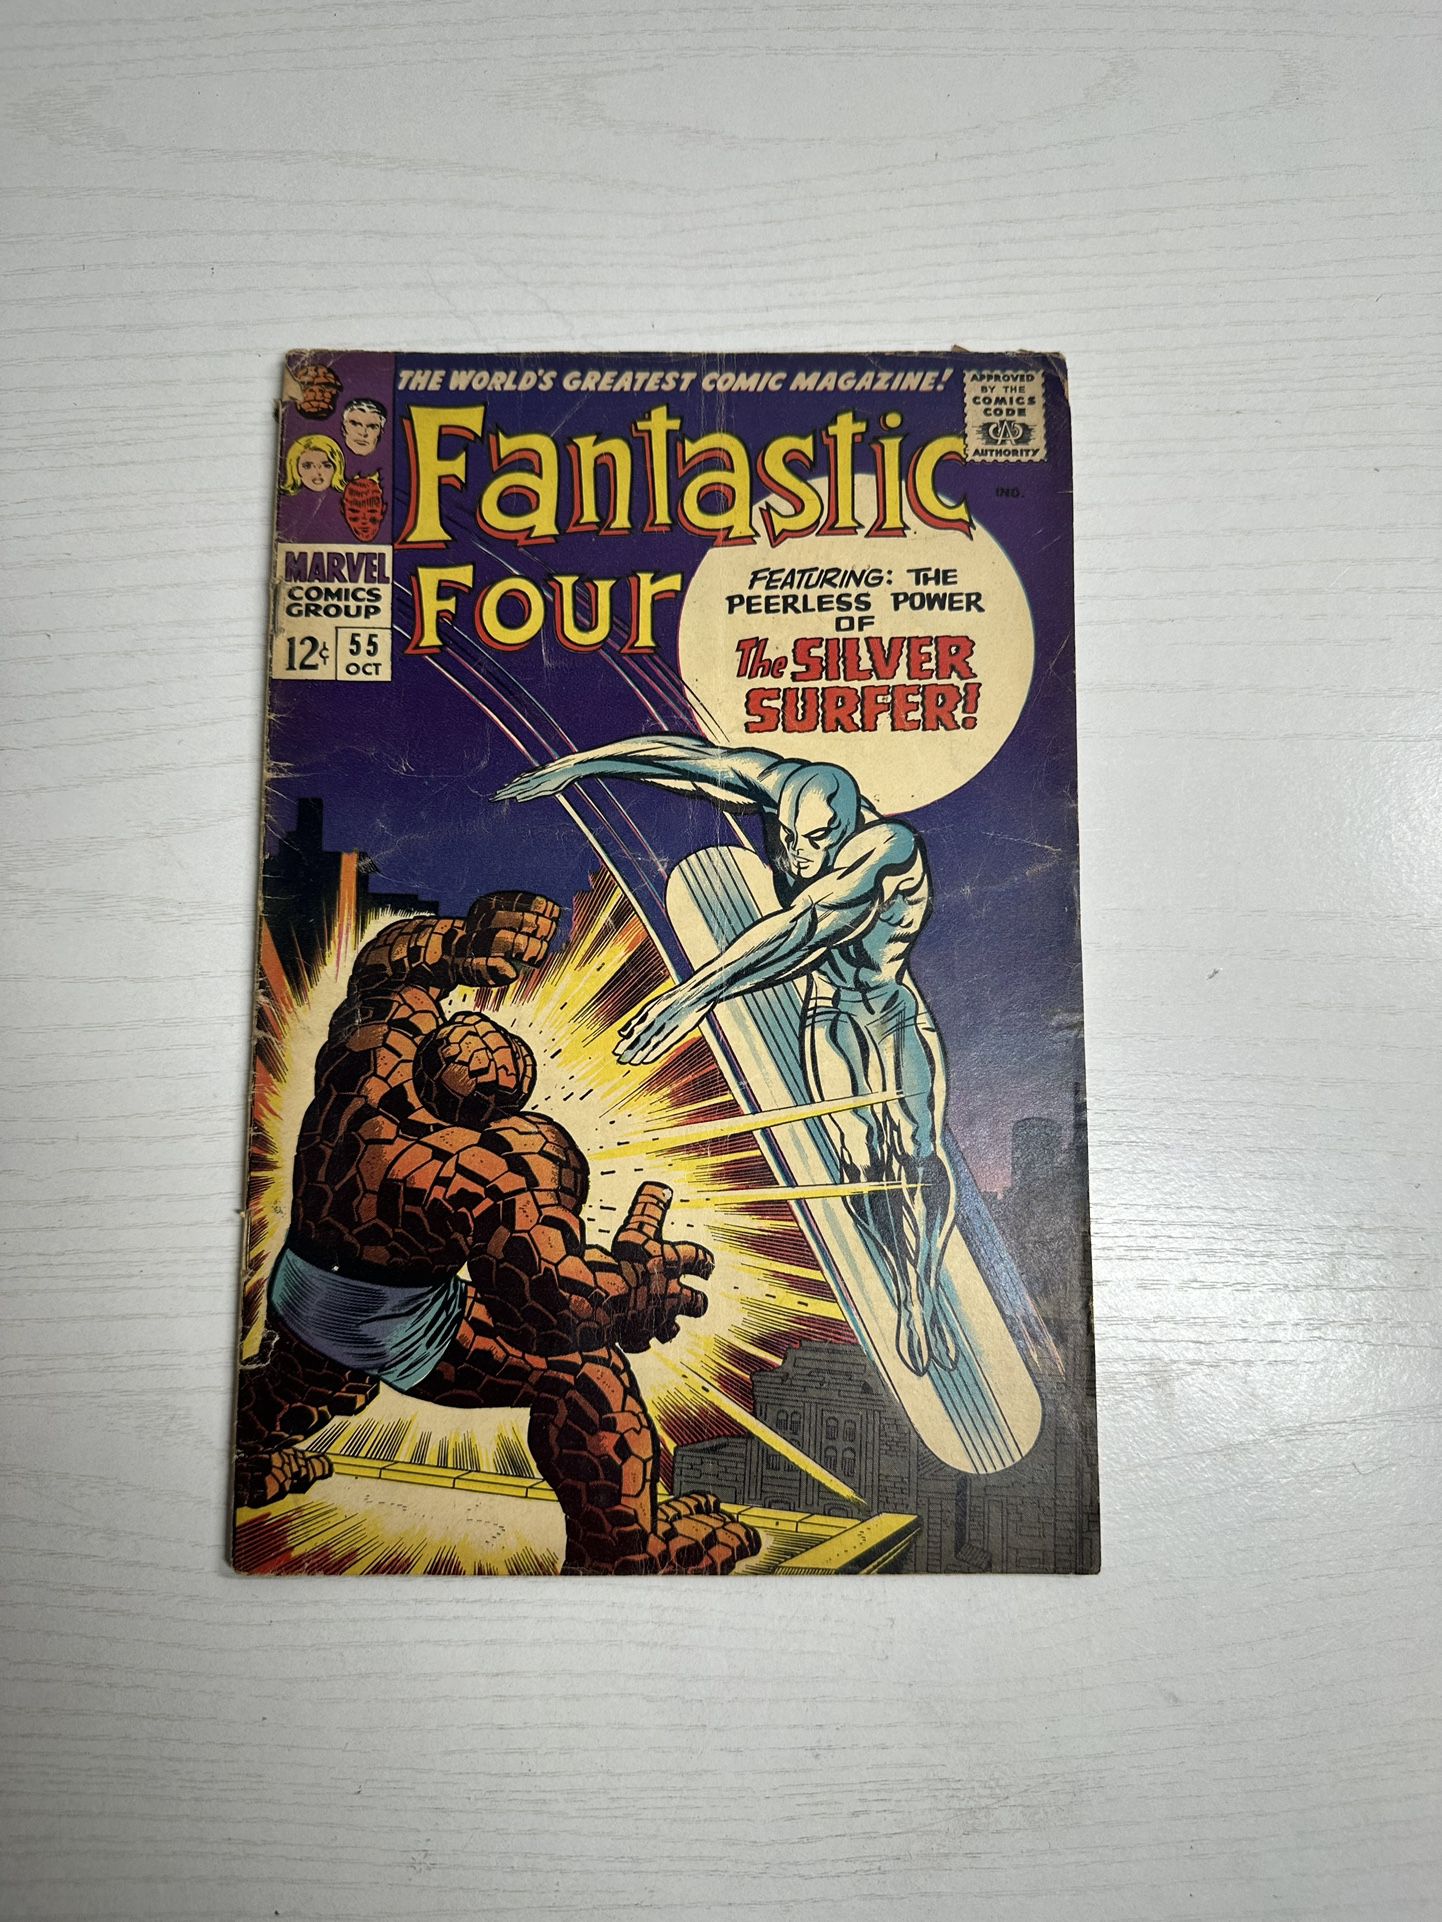 Fantastic Four #55 (1966) Iconic Silver Surfer vs Thing Cover Marvel Comics